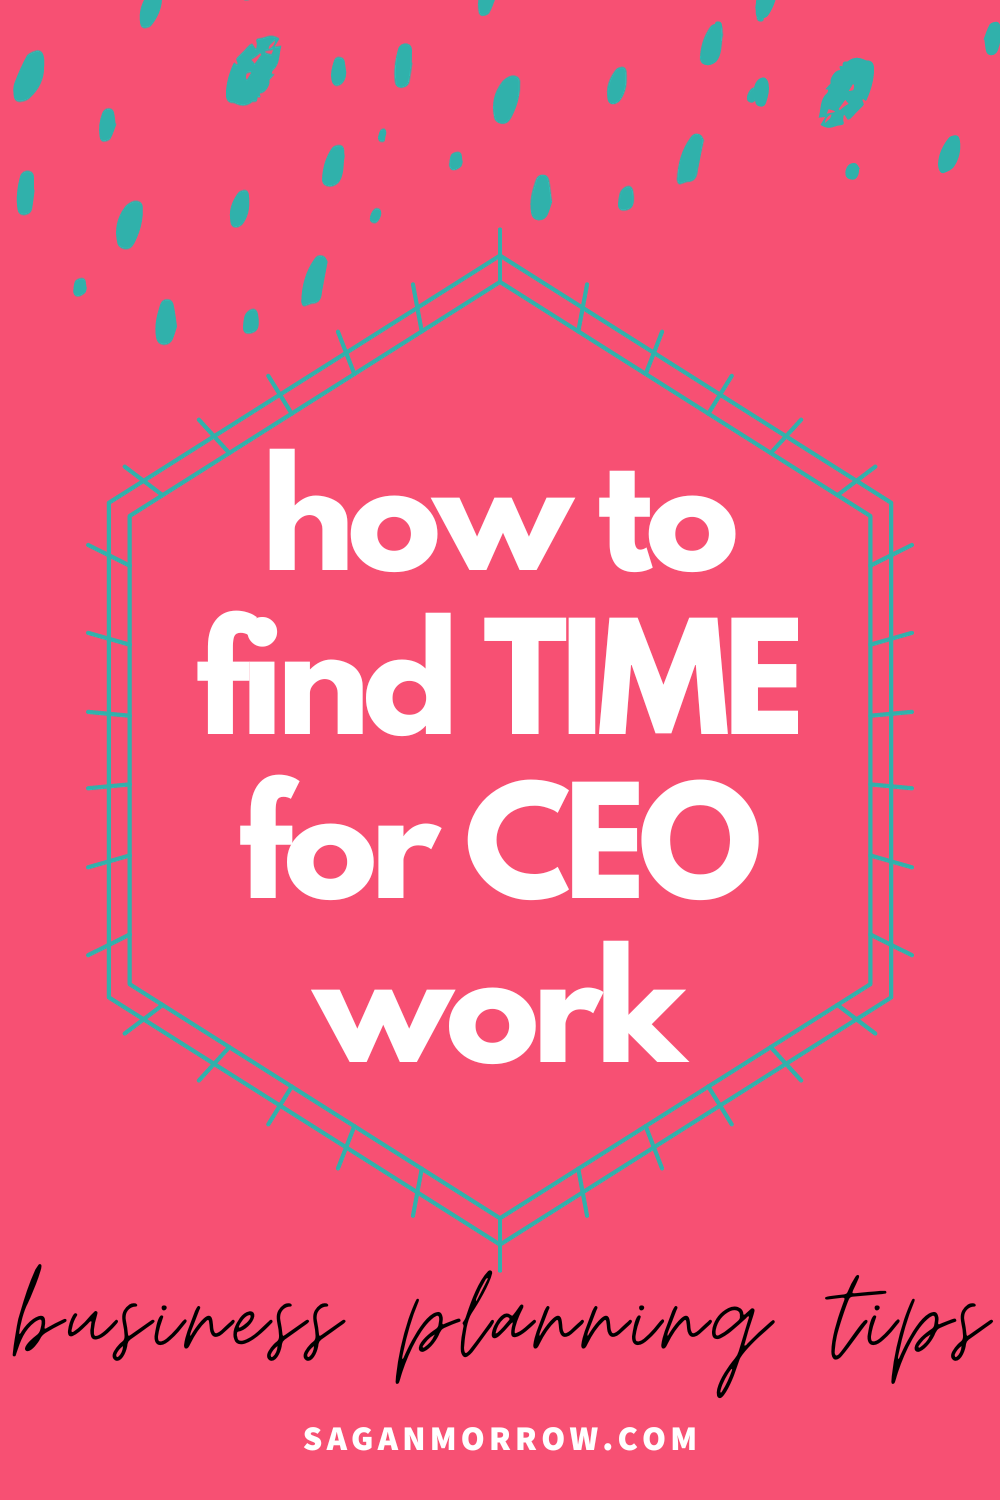 How to find time for CEO work - business planning tips for freelancers